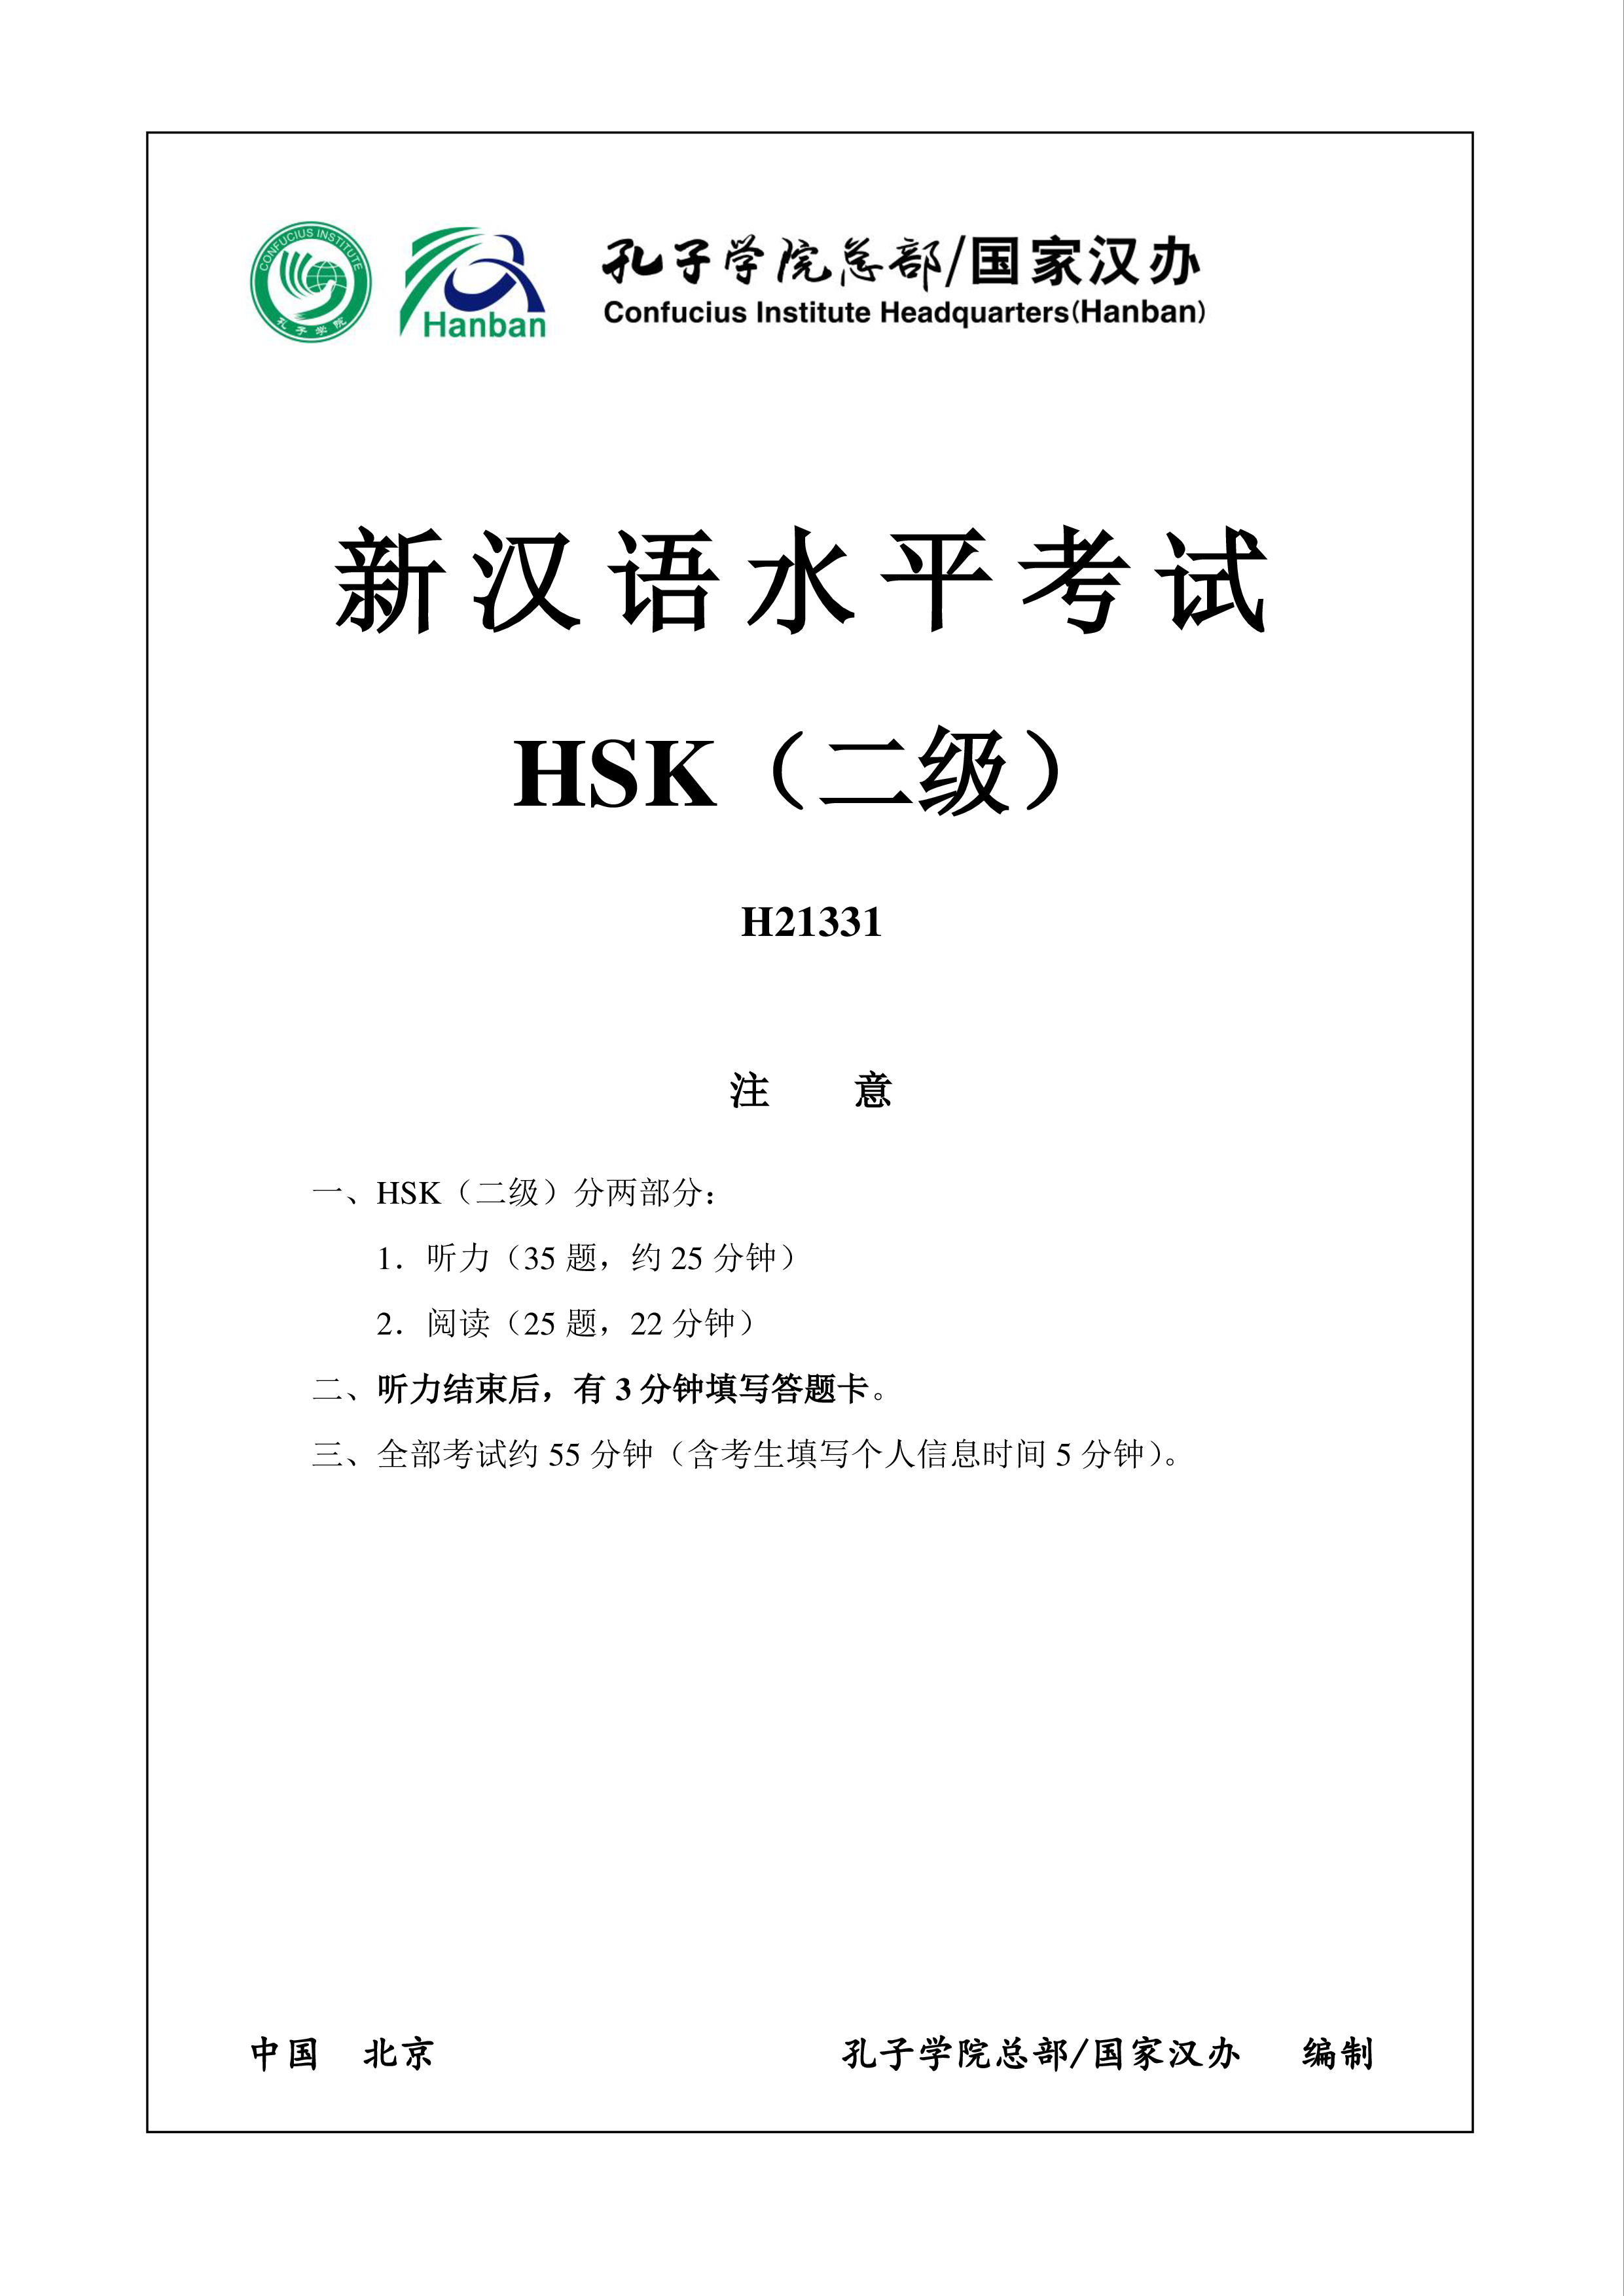 HSK2 Chinese Exam including Answers # HSK2 H21331 main image